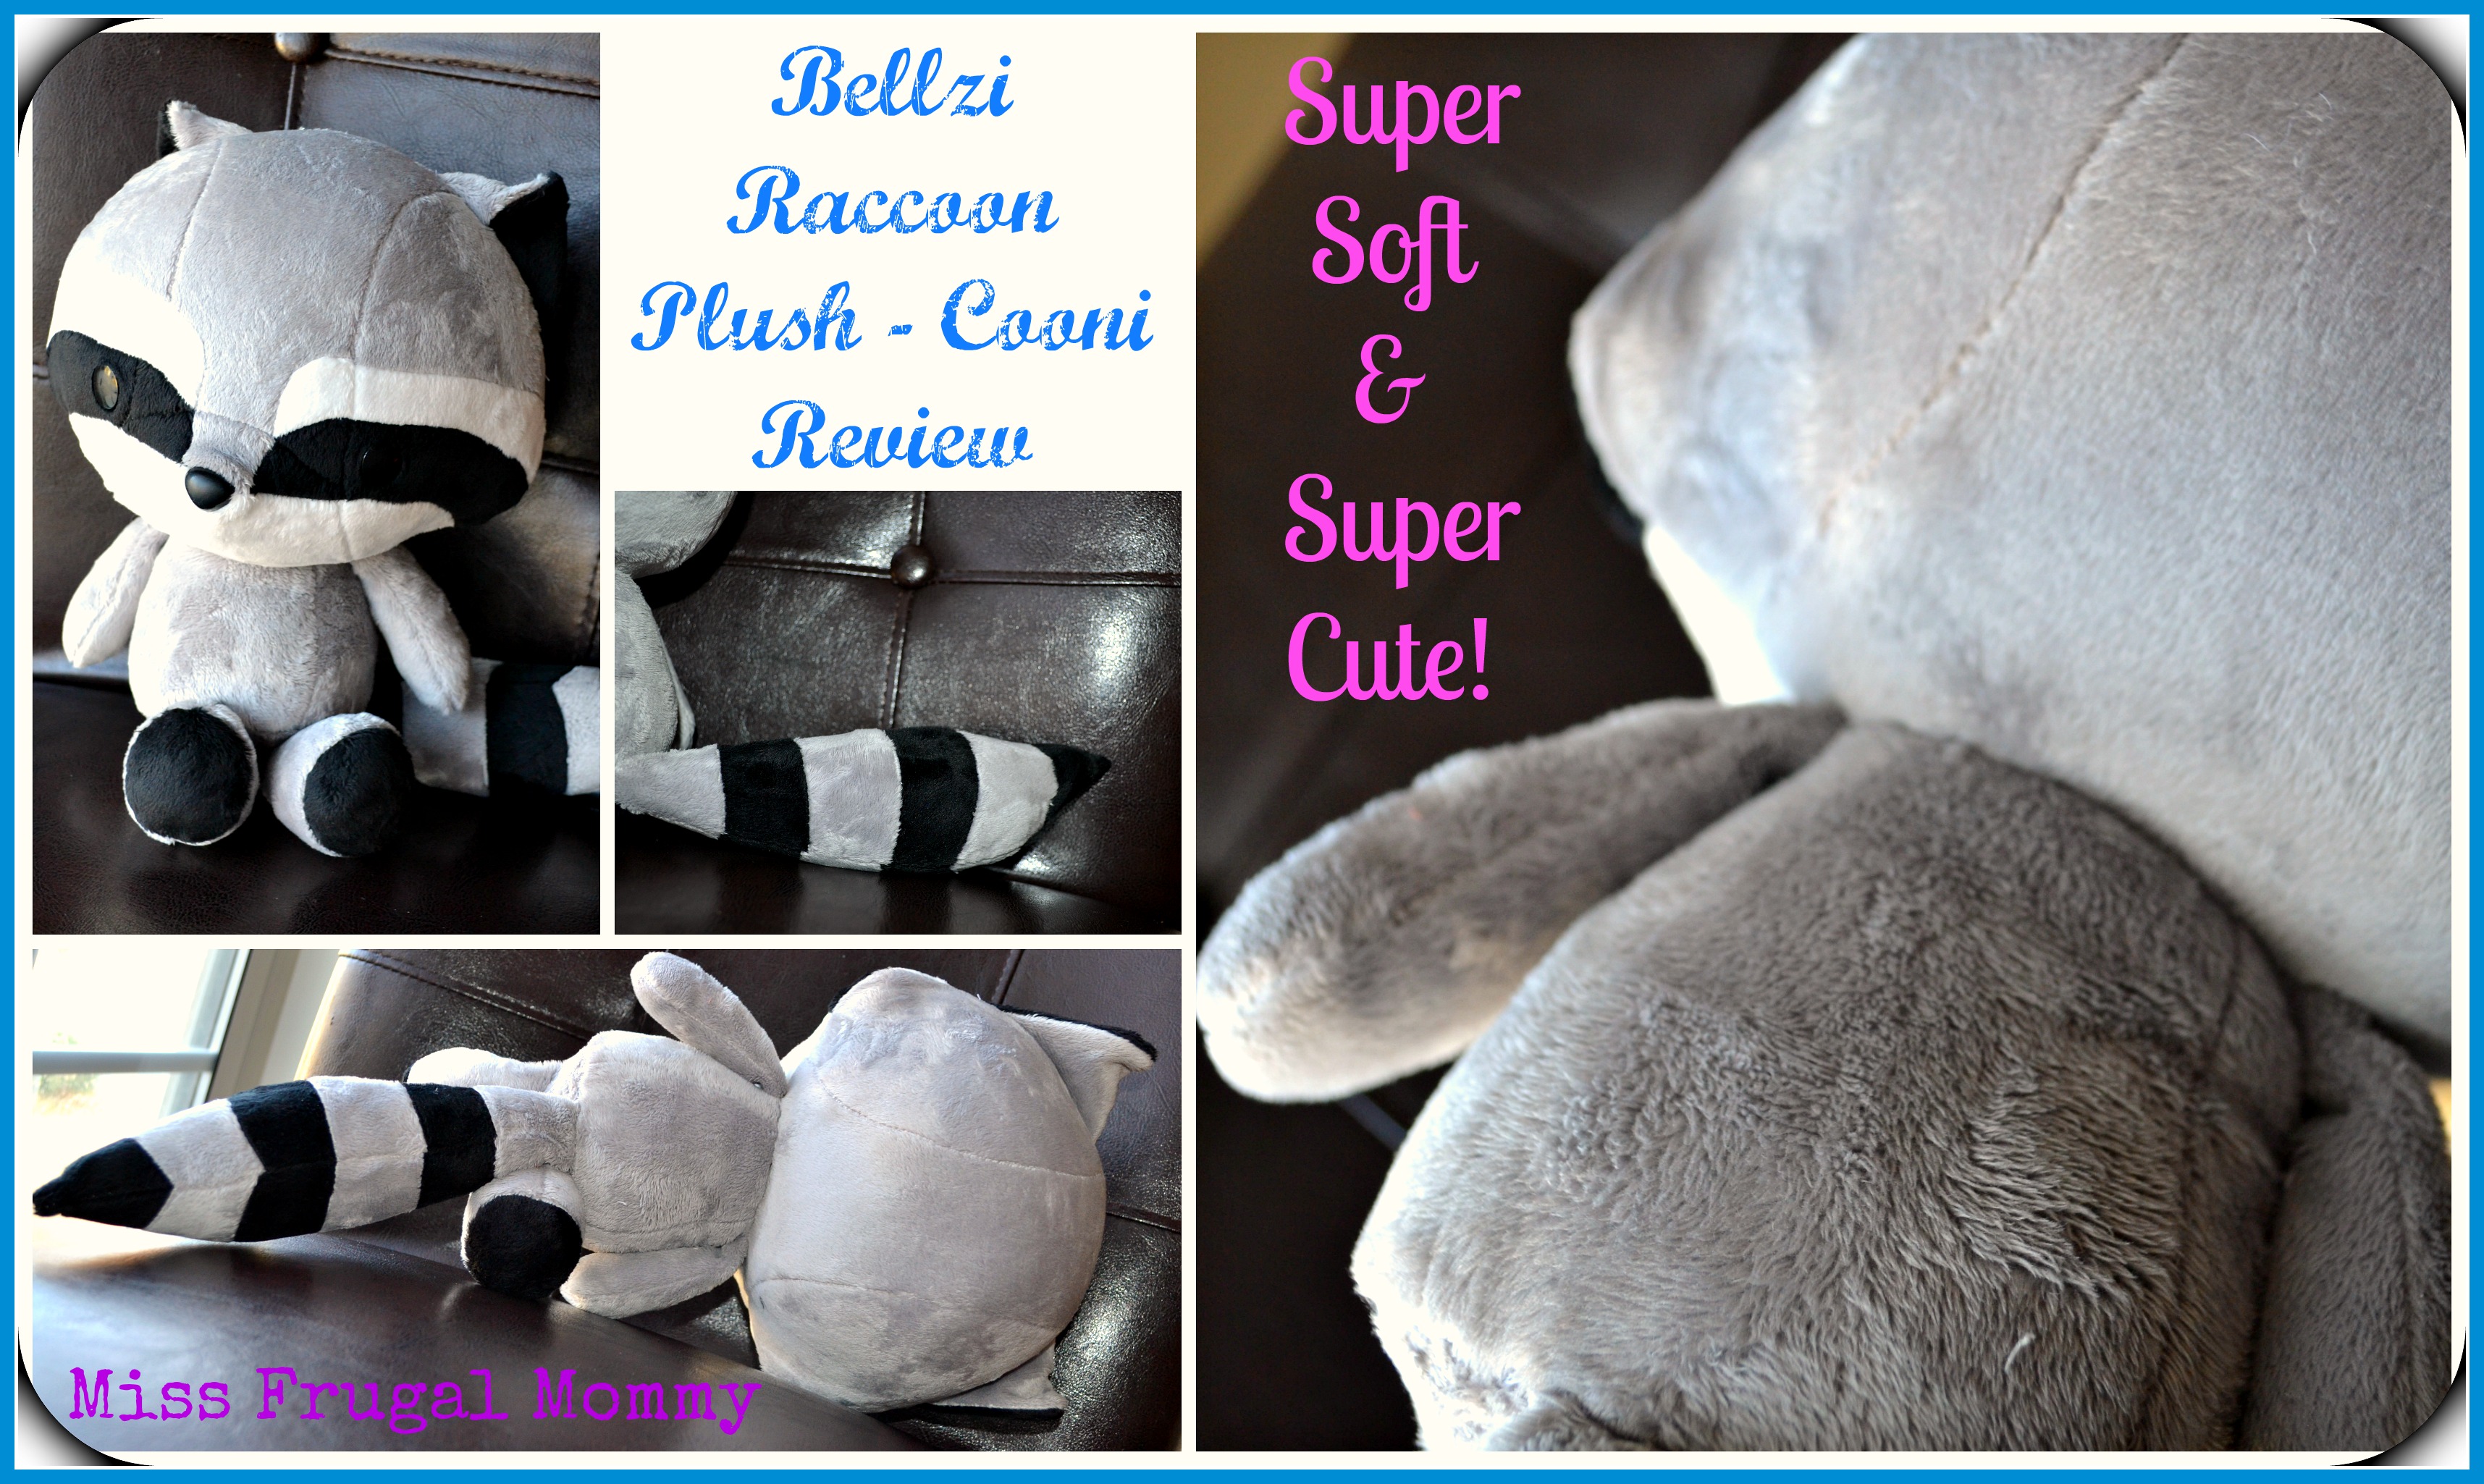 Bellzi Raccoon Plush - Cooni Review (Getting Ready For Baby Gift Guide)